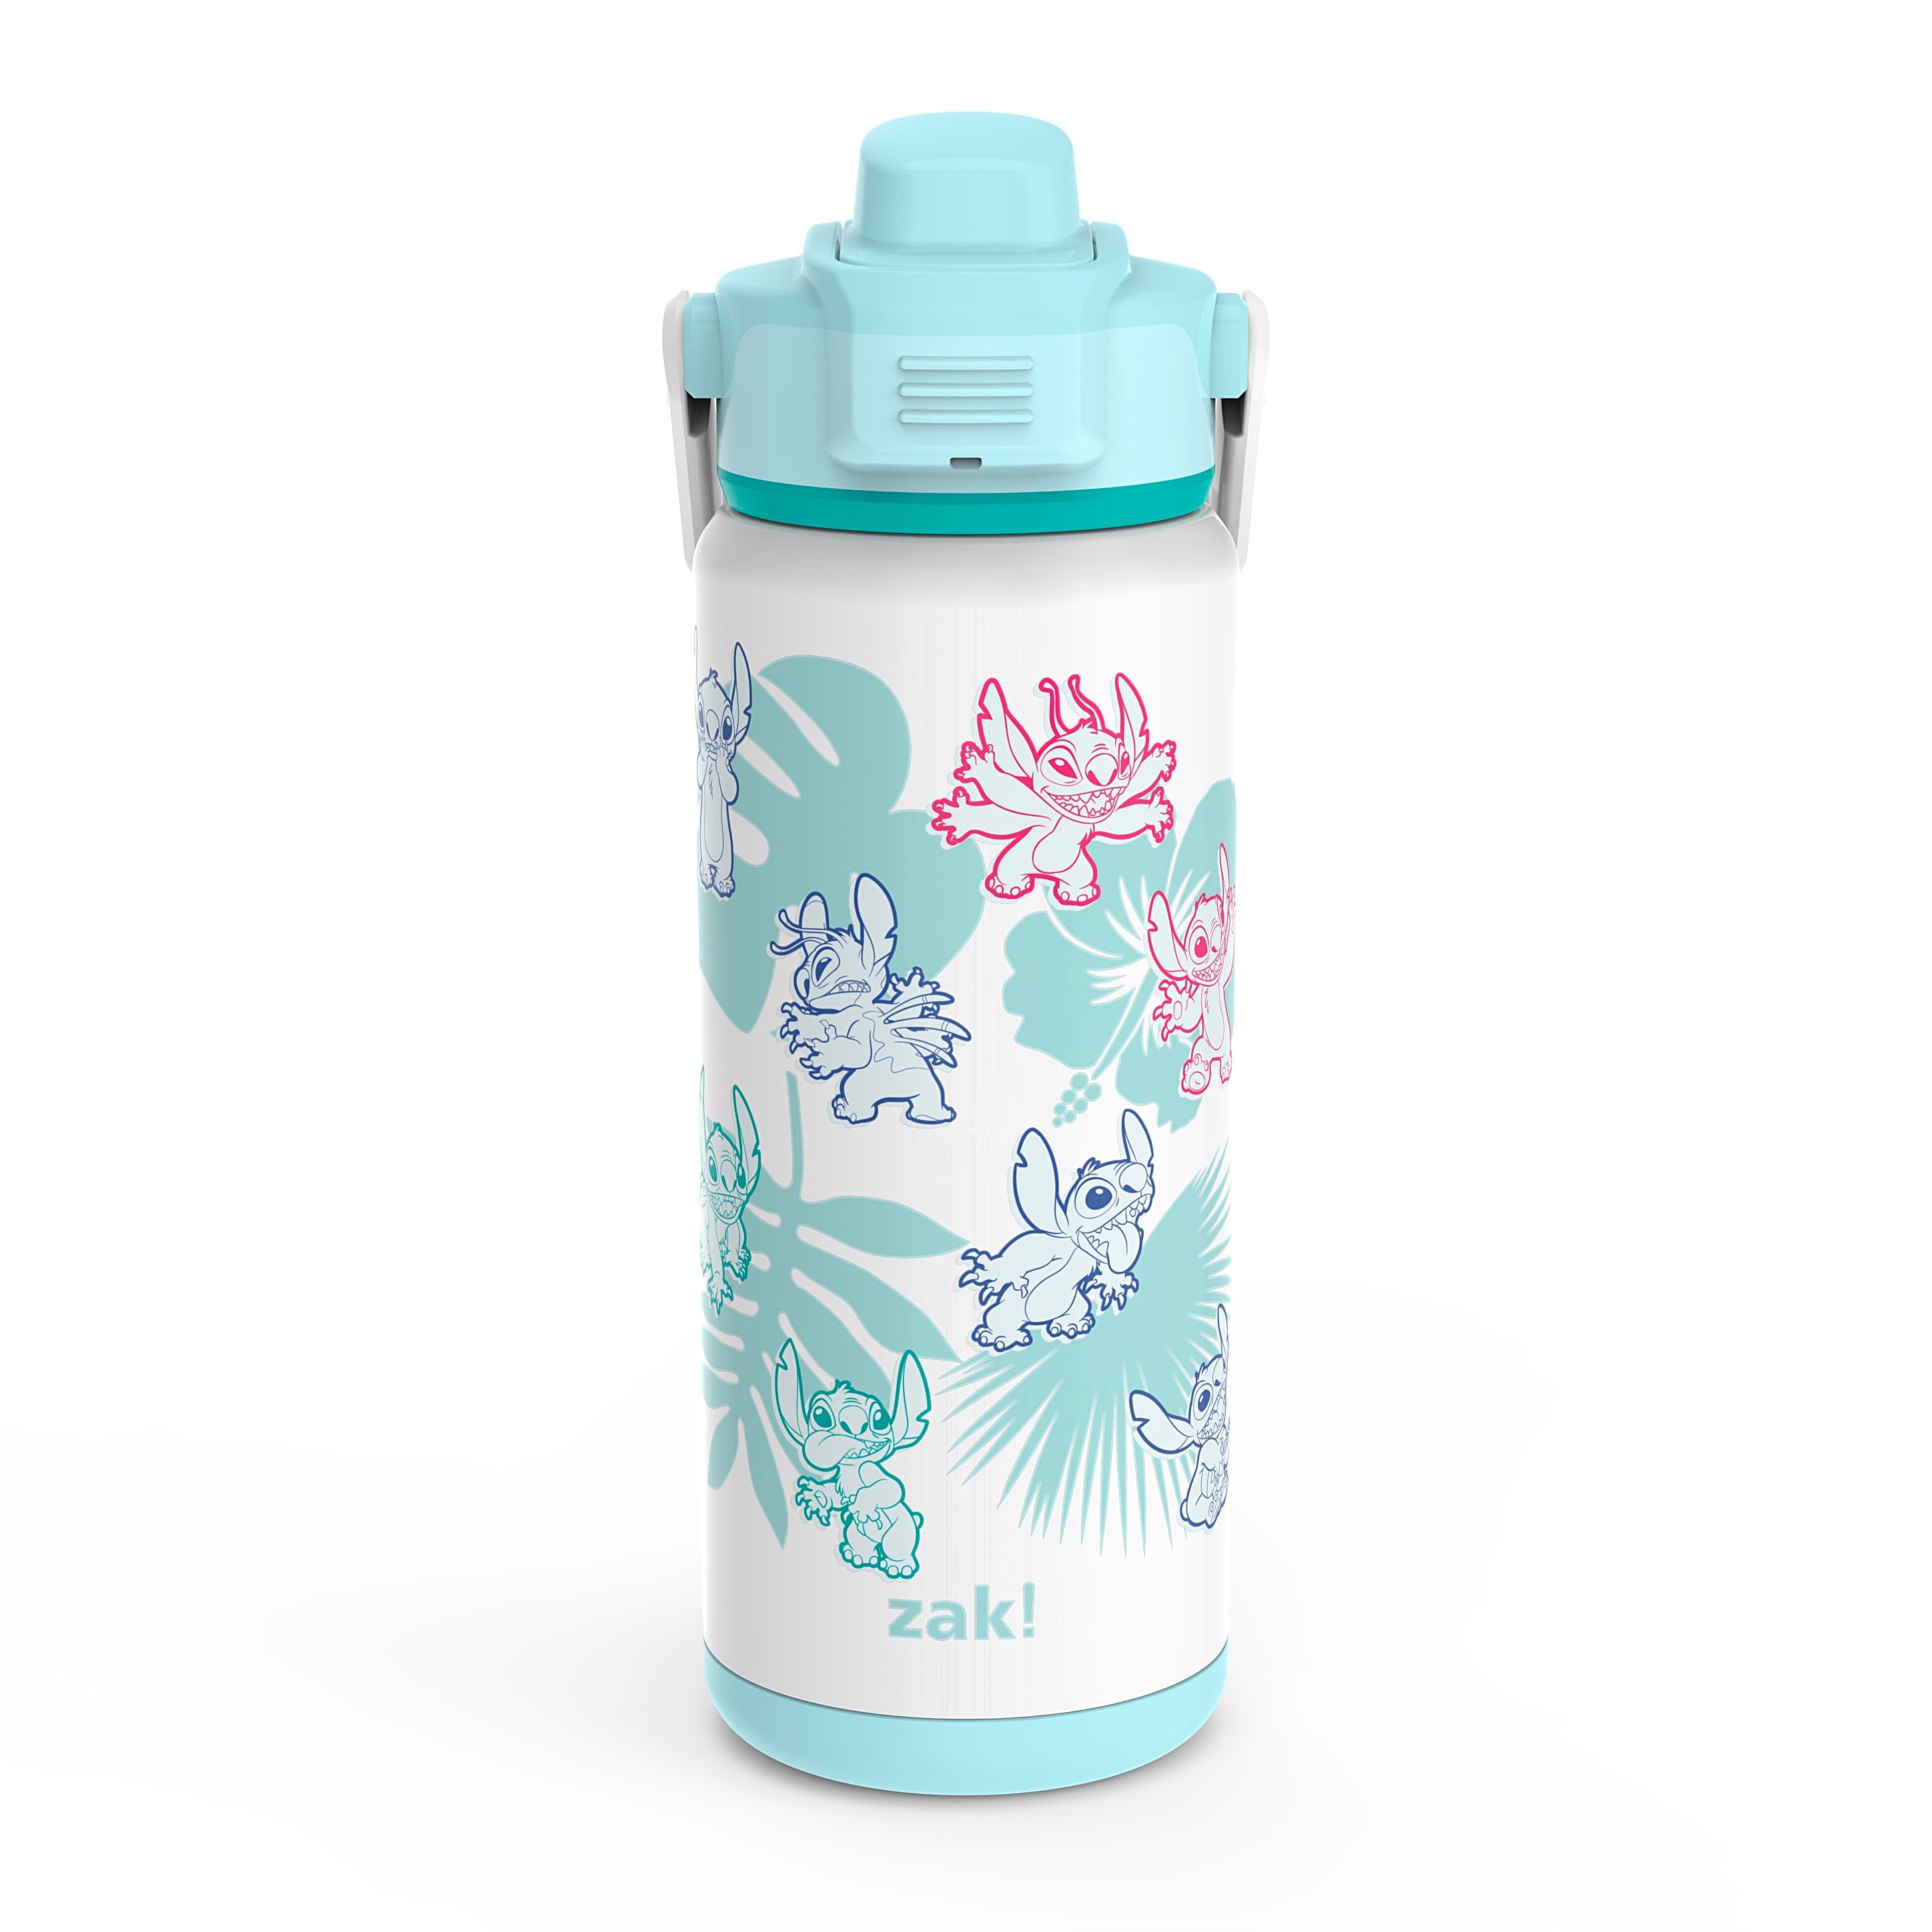 Castle Bound Travel Expert 20oz Insulated Water Bottle